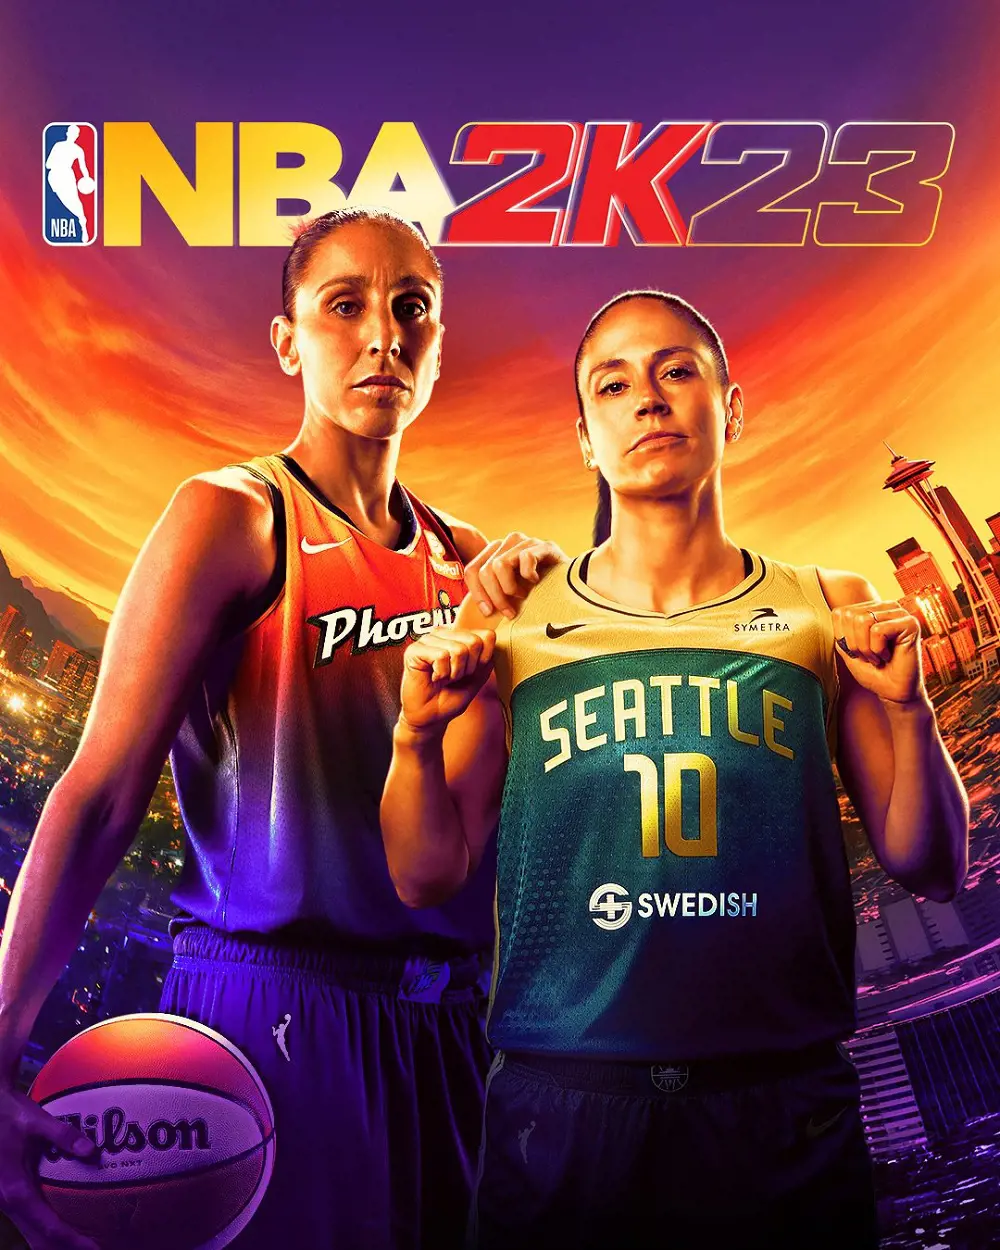 Diana Taurasi and Sue Bird featured on the cover of NBA 2K23 WNBA Edition